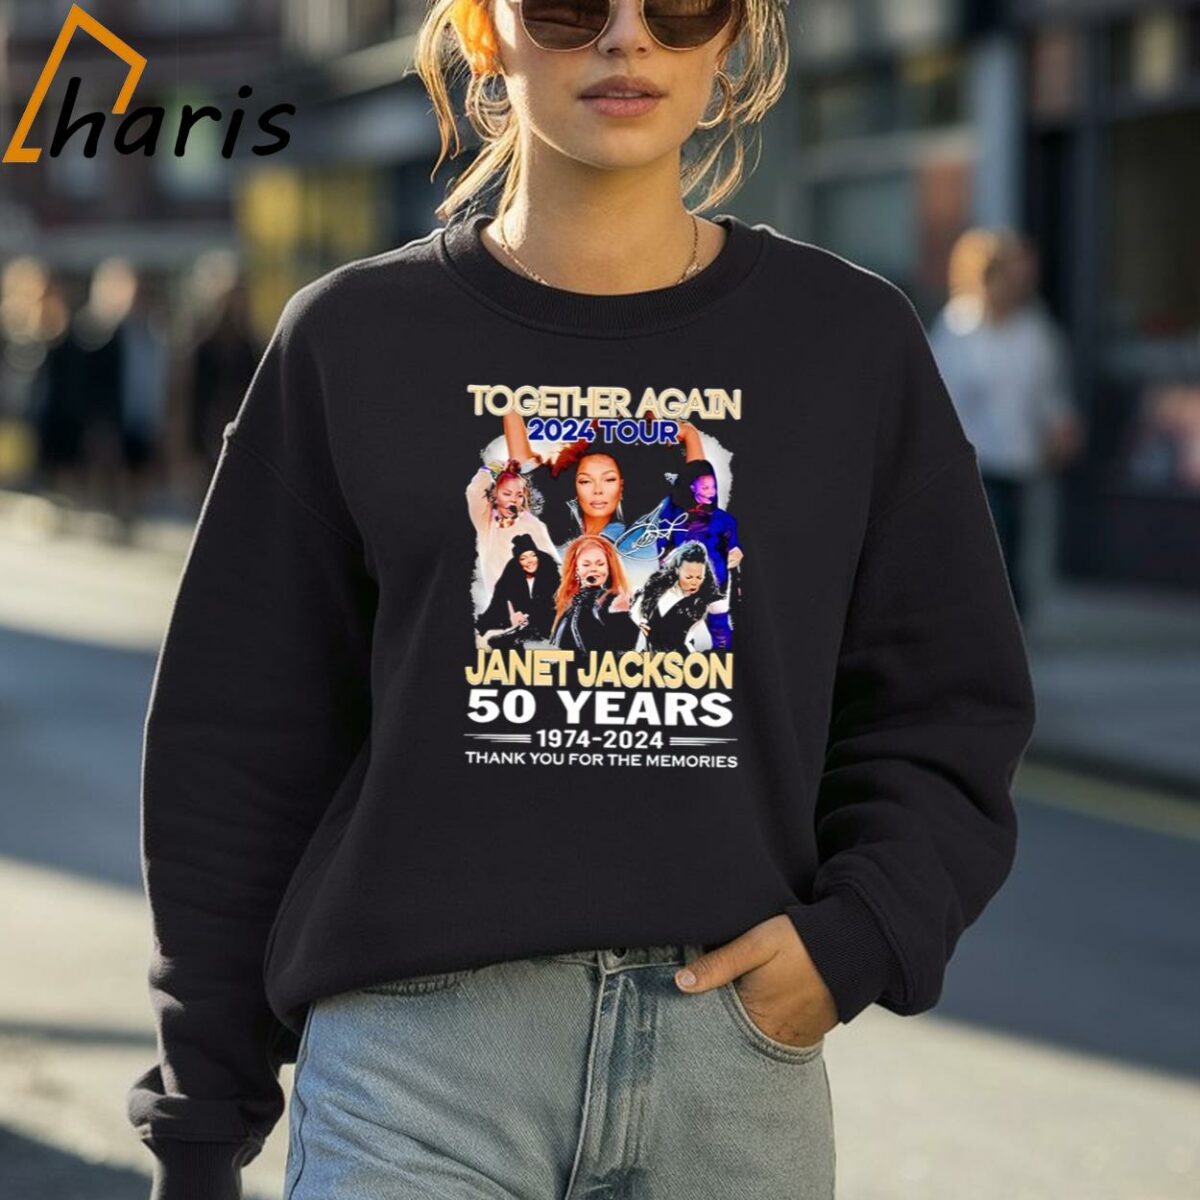 Together Again 2024 Tour Janet Jackson 1974 2024 Thank You For The Memories T Shirt 4 Sweatshirt